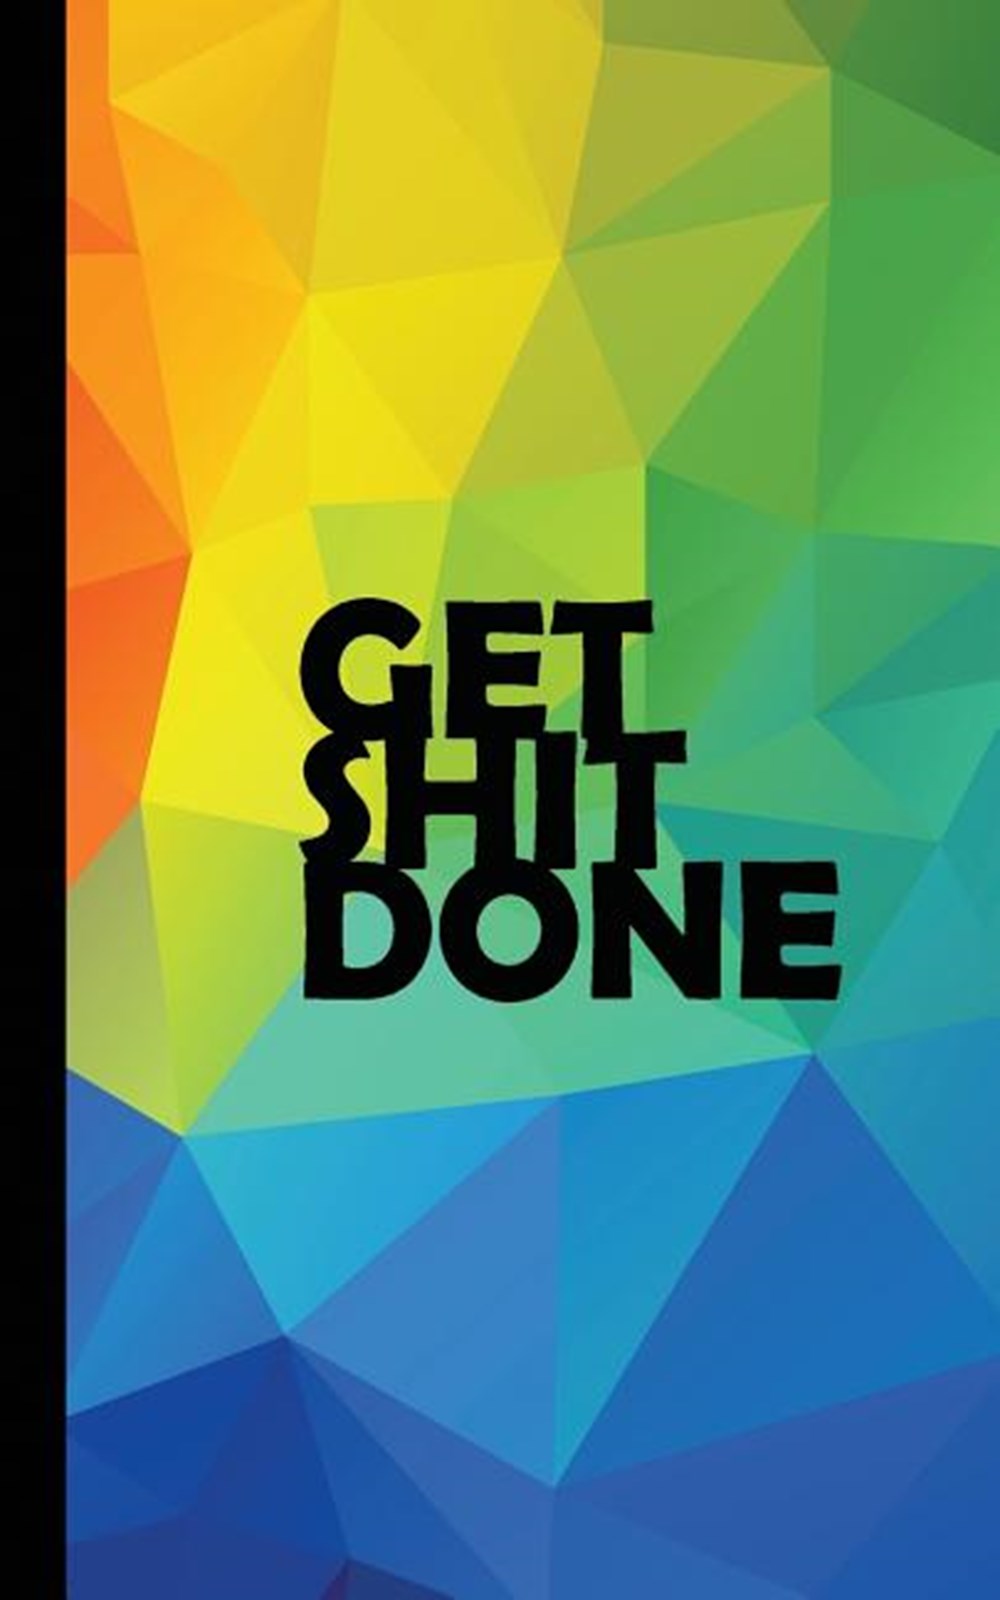 Get Shit Done 2019 Weekly Planner Tuned to Tone - Workout or Business - Keep Up the Hustle!